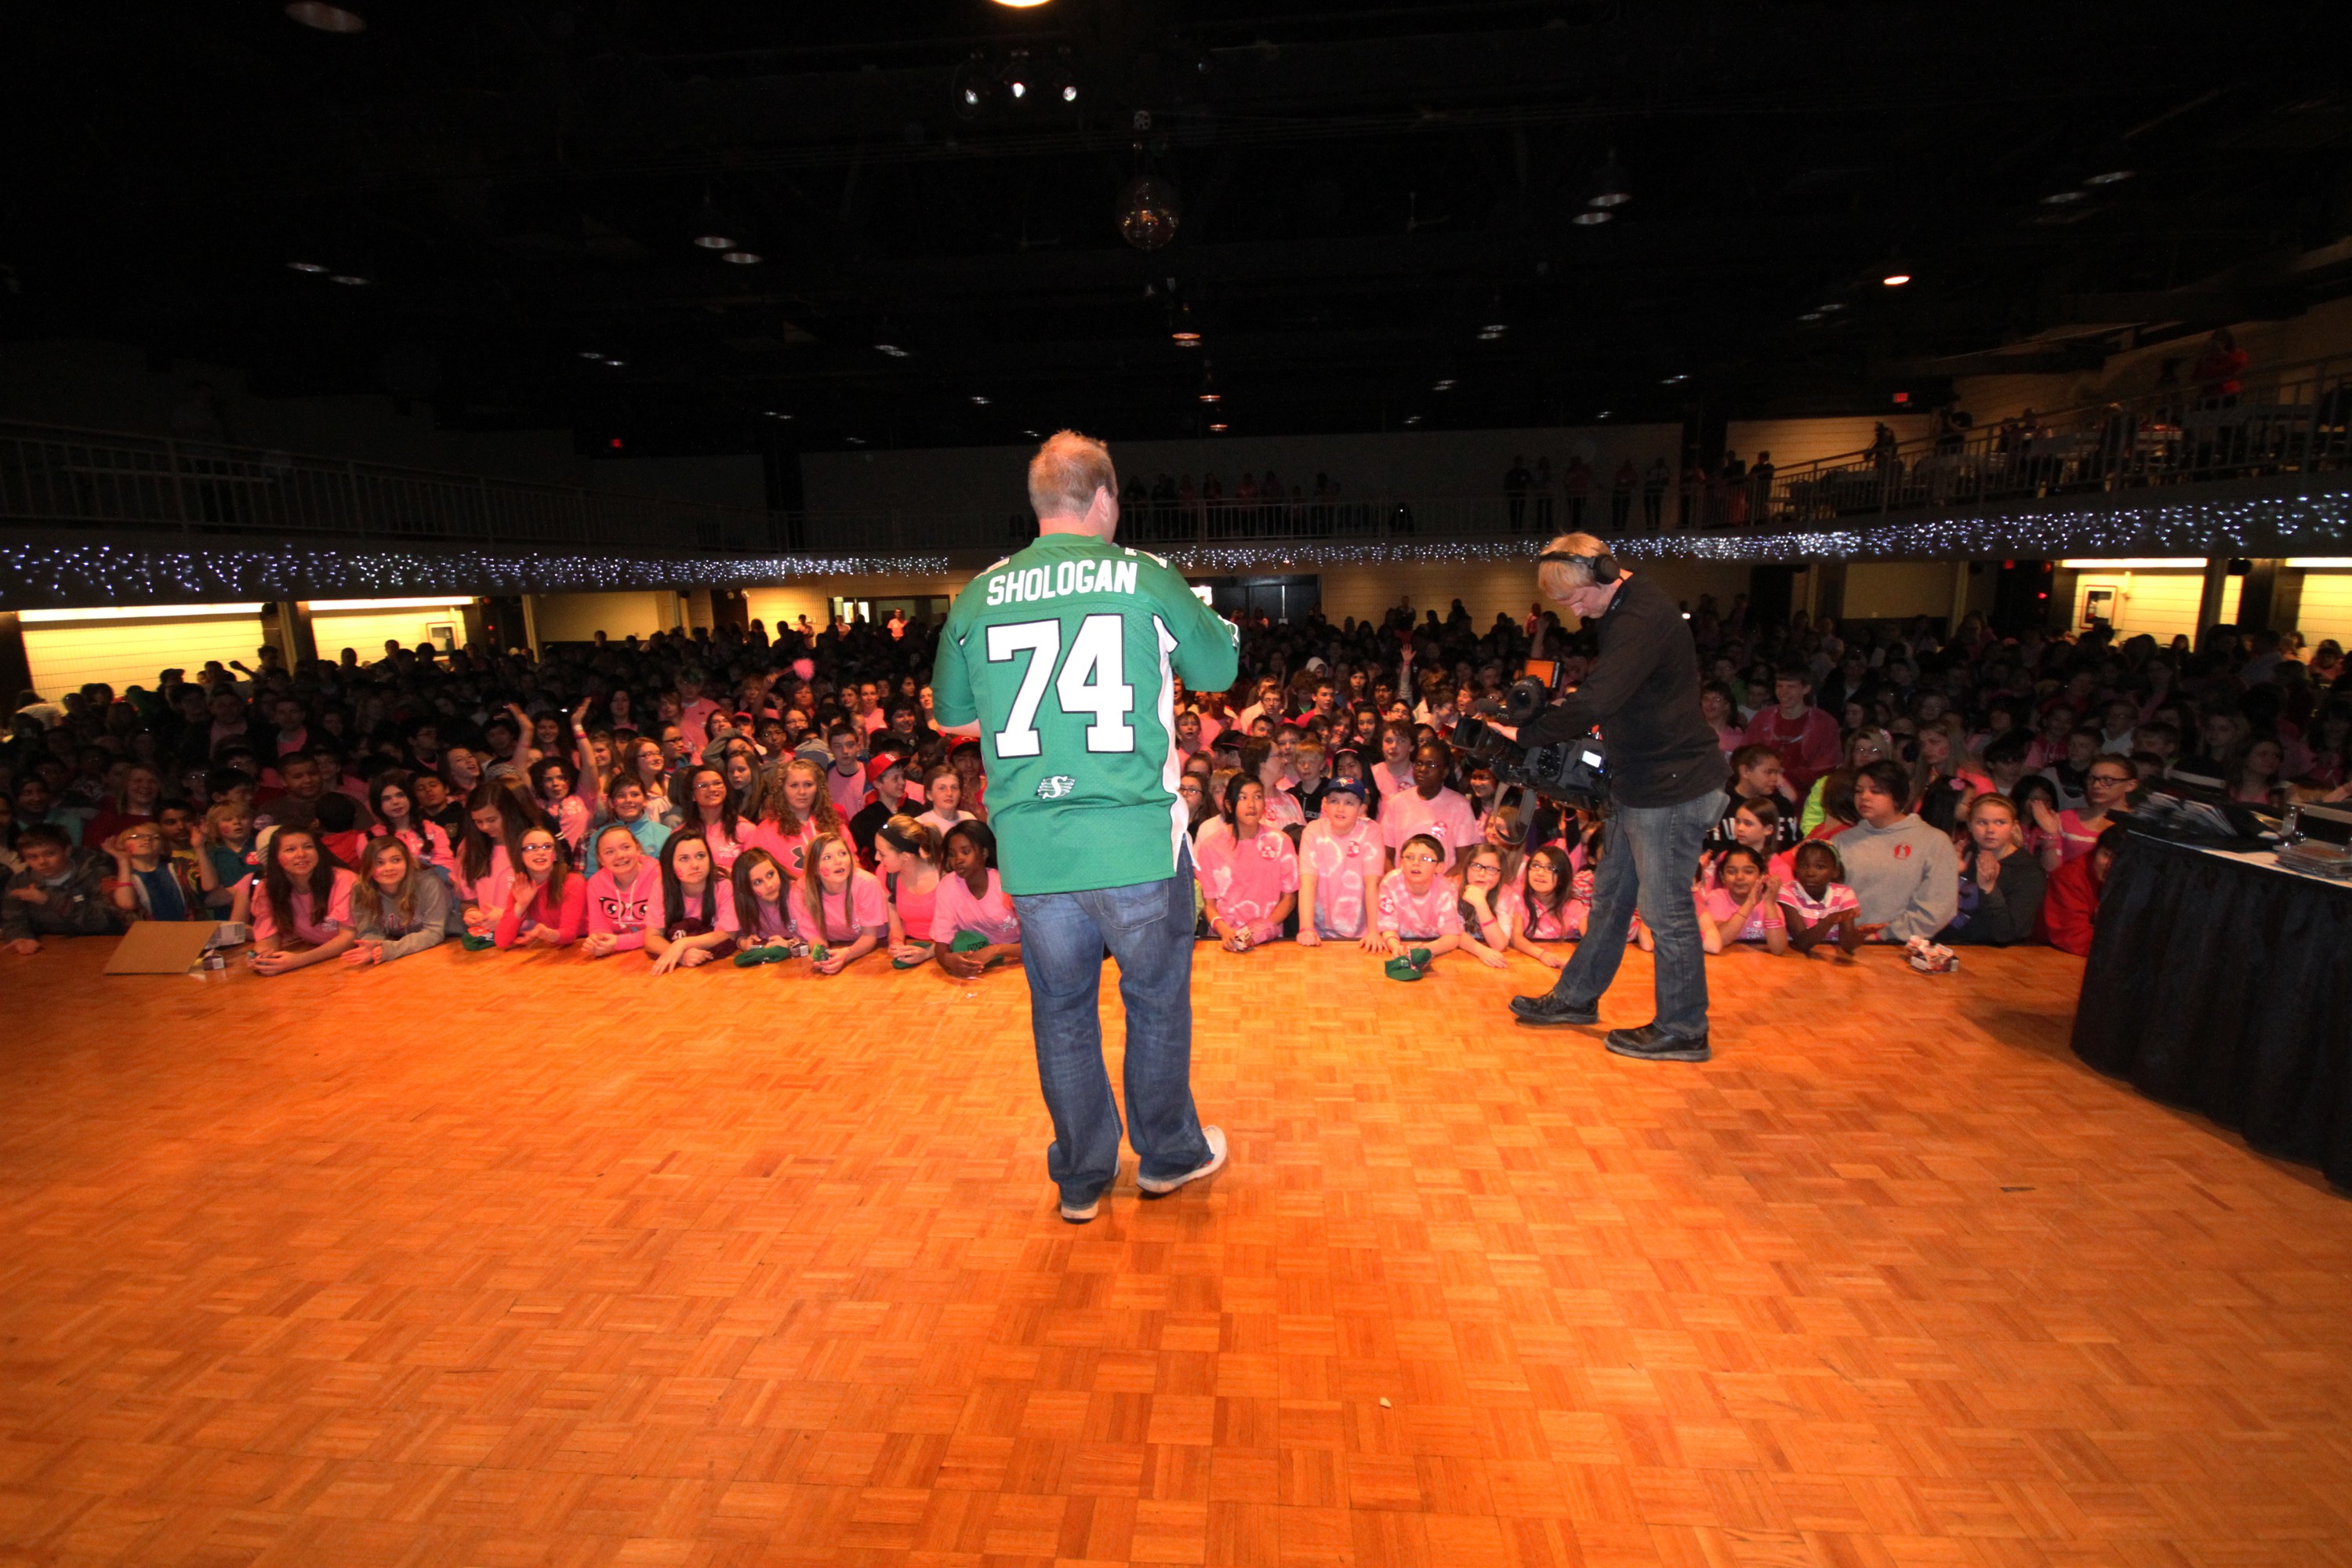 Saskatchewan Rough Rider's Defensive Tackle, Keith Shologan, speaks to over 1,000 students about bullying.